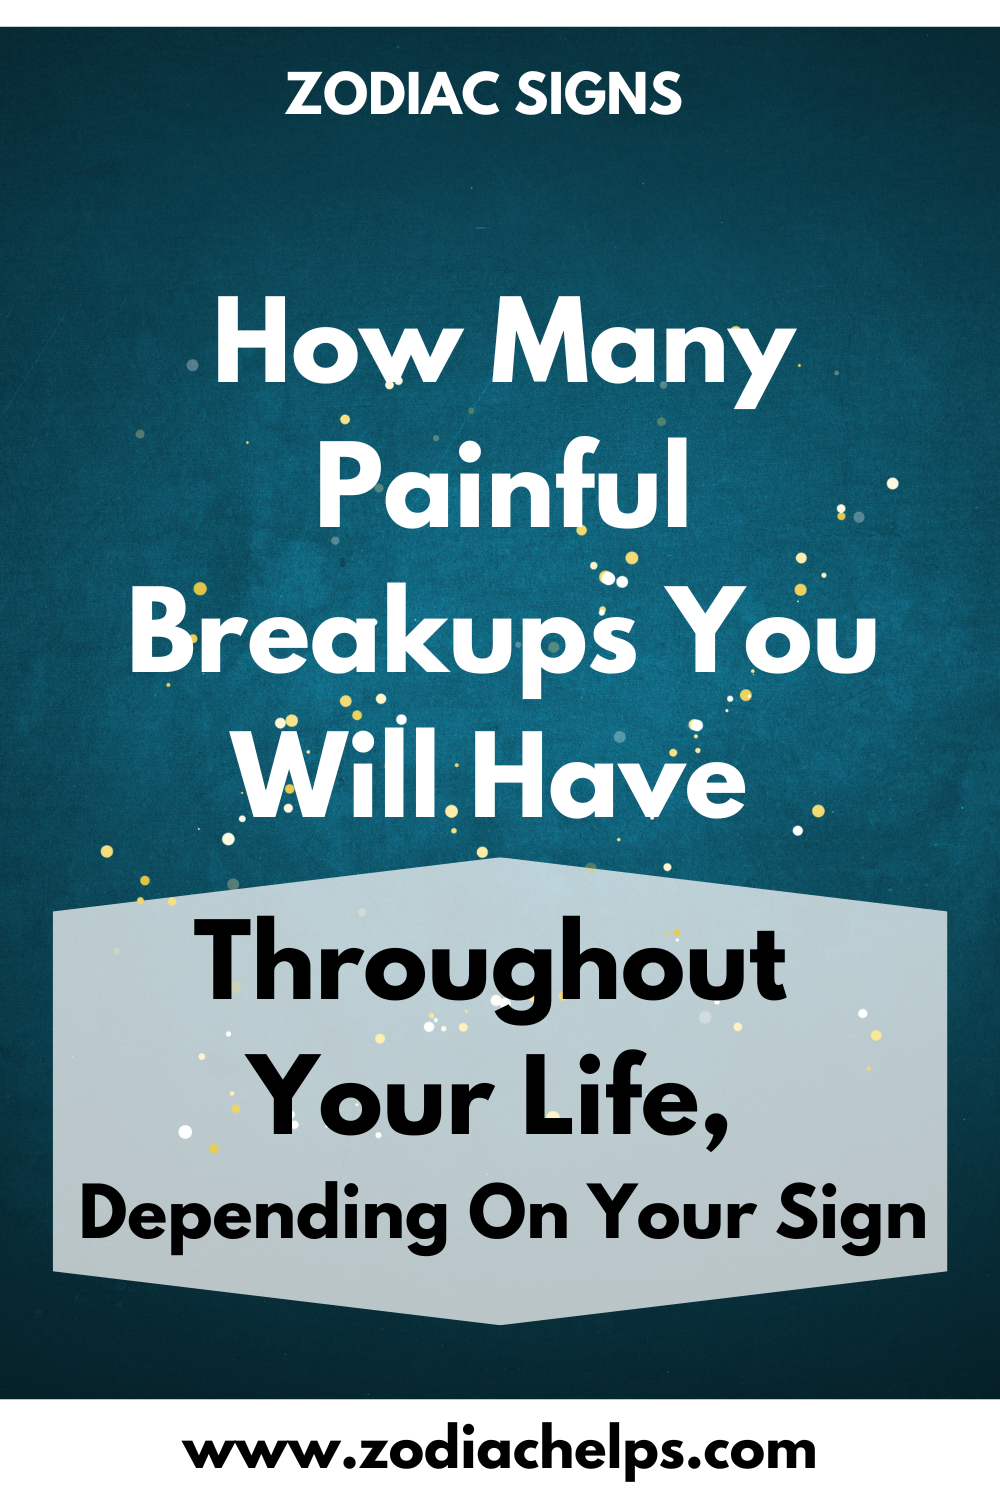 How Many Painful Breakups You Will Have Throughout Your Life, Depending On Your Sign